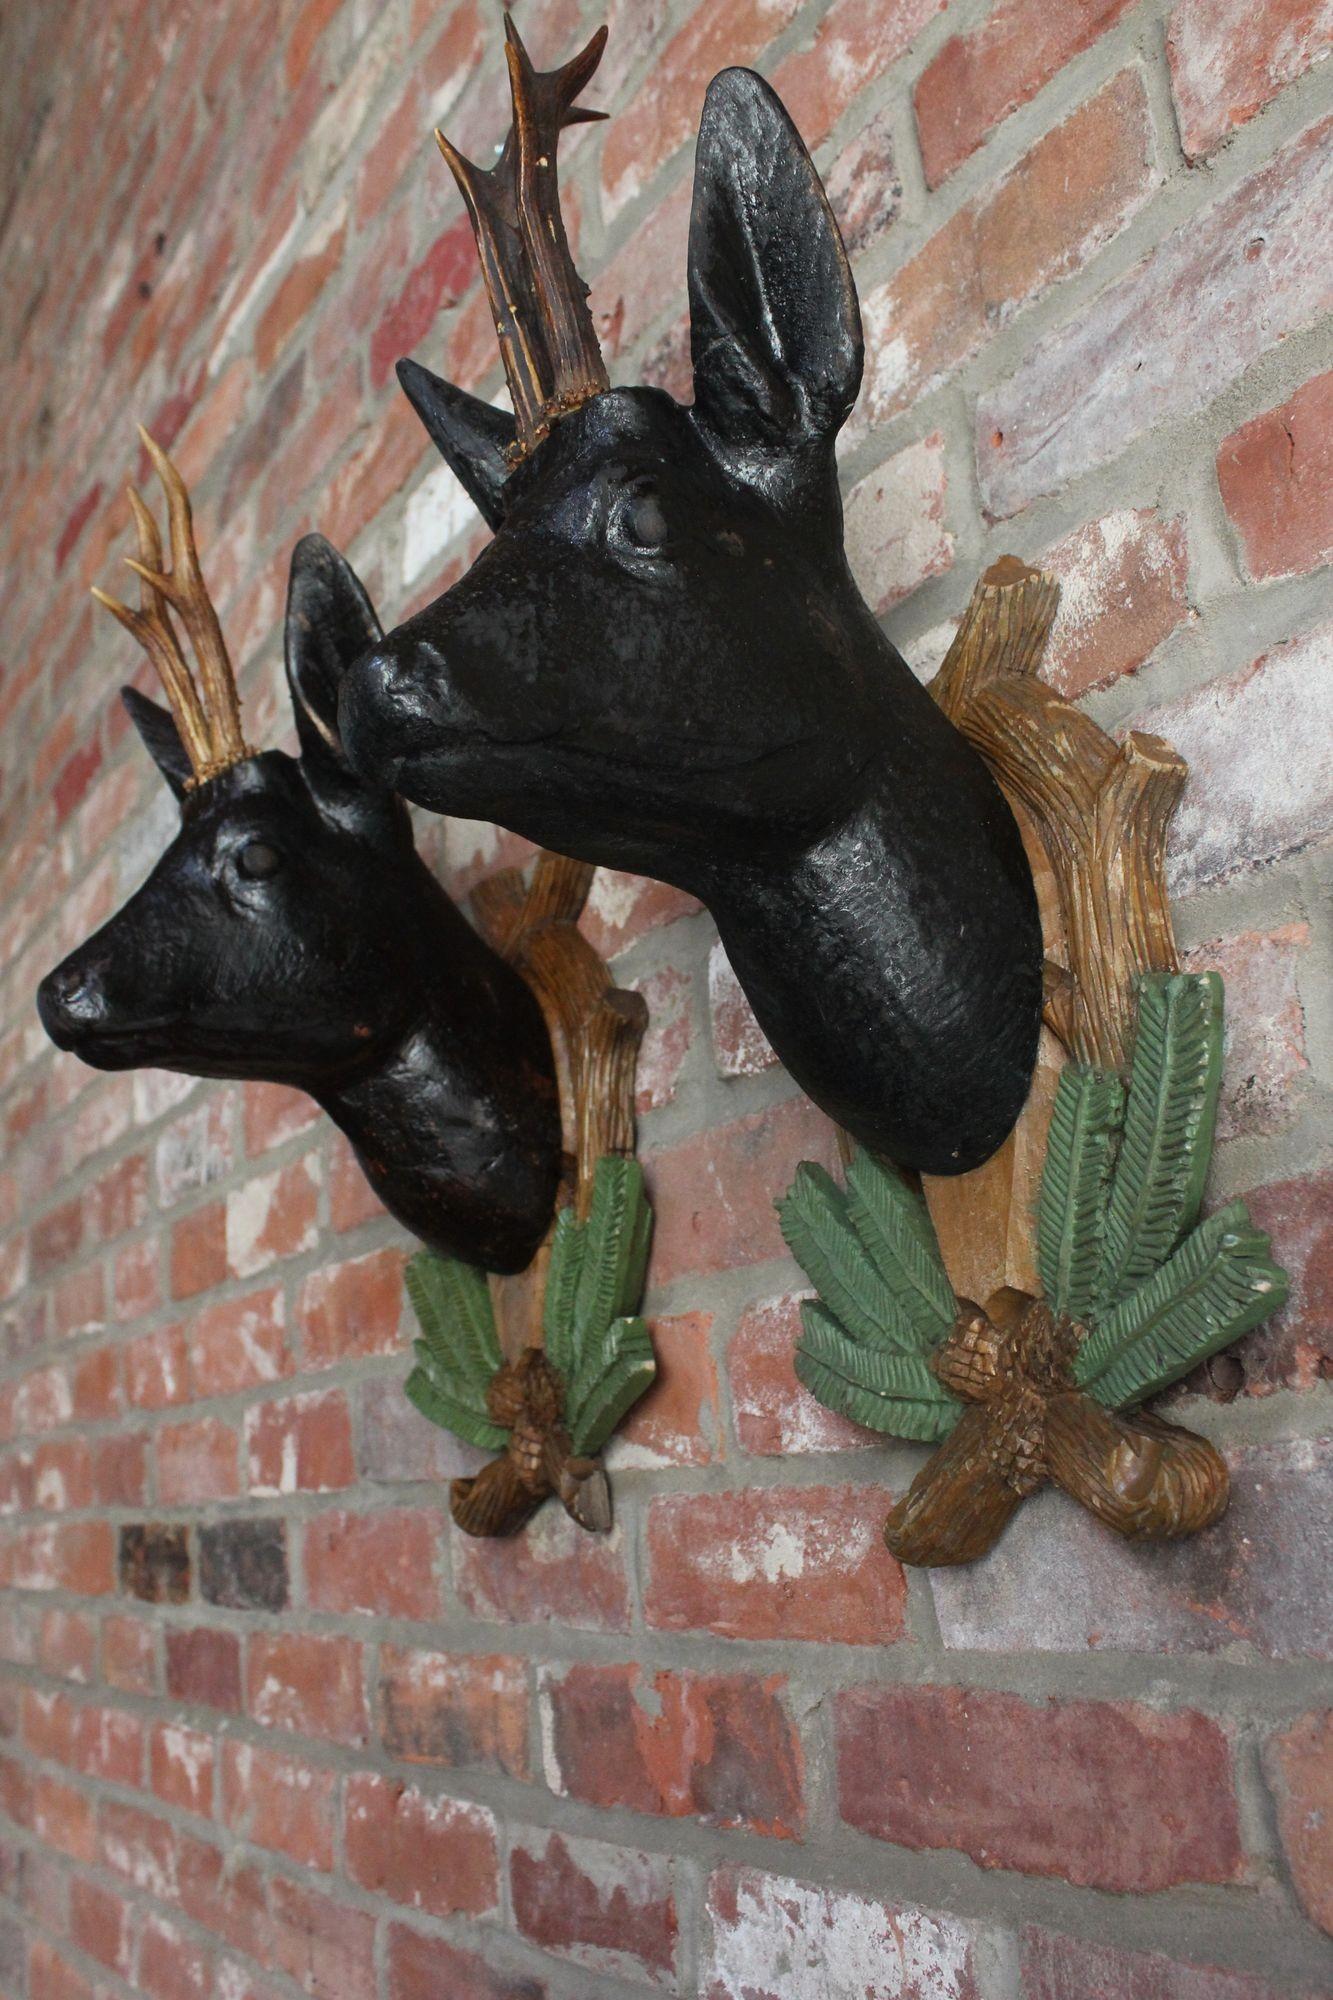 Set of two similar Black Forest carved and hand-painted 'stag' sculptures with real antlers mounted to decorative 'wreath' plaques for wall hanging (ca. 1930s/40s, Germany).
One deer is slightly darker than the other, apparent only in direct